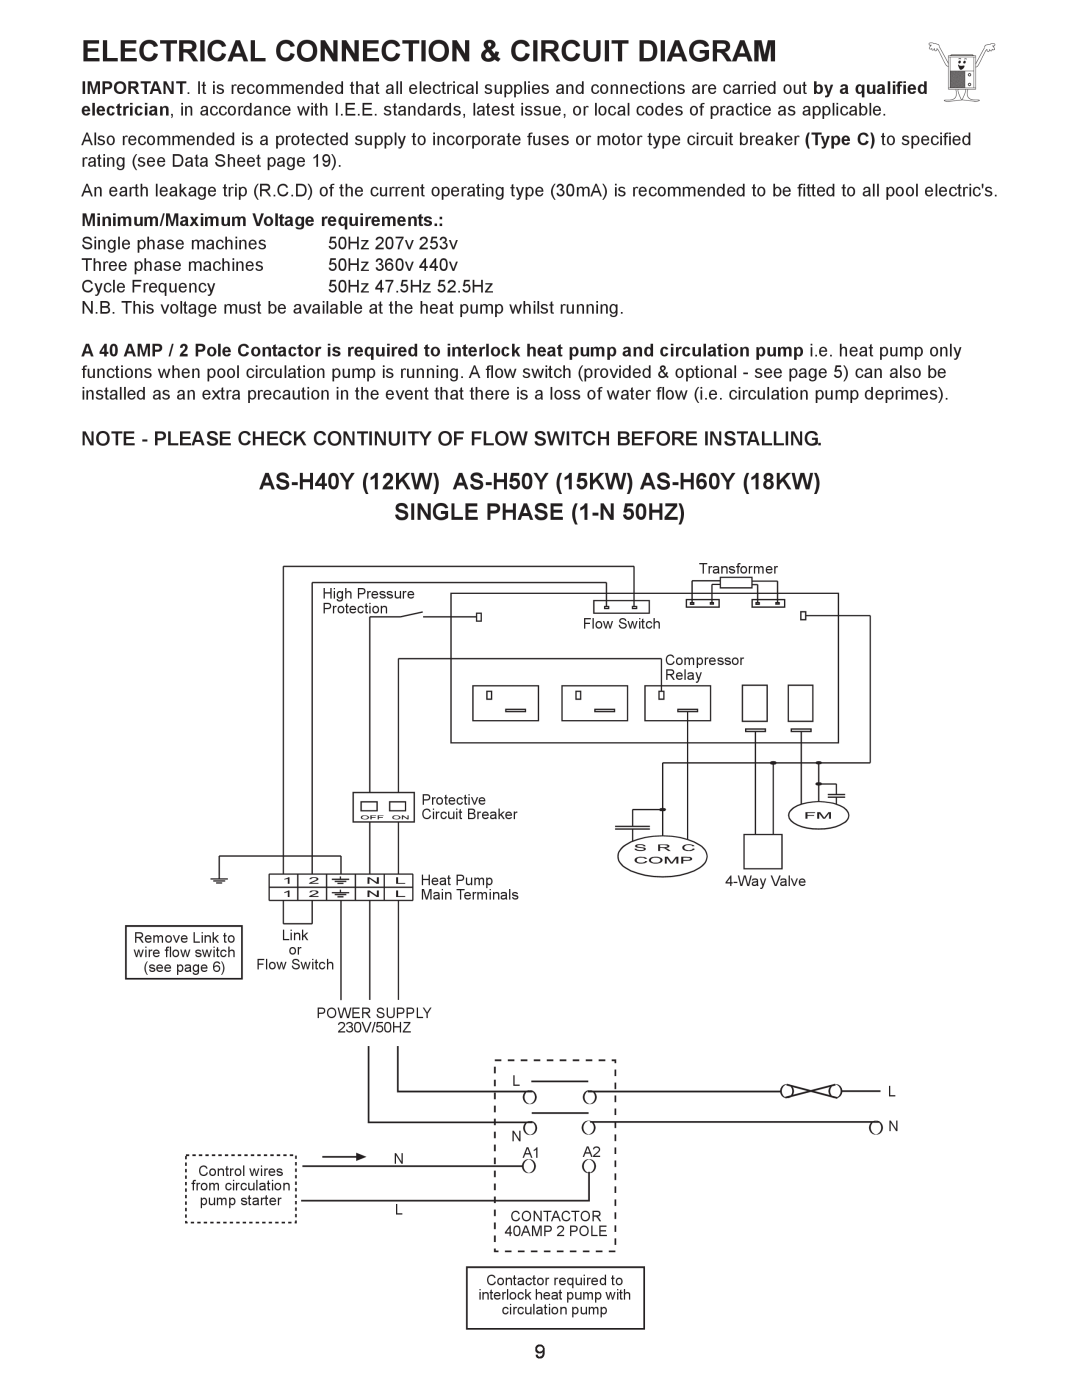 Sigma Electrical Connection & Circuit Diagram, AS-H40Y12KW AS-H50Y15KW AS-H60Y18KW, SINGLE PHASE 1-N50HZ 